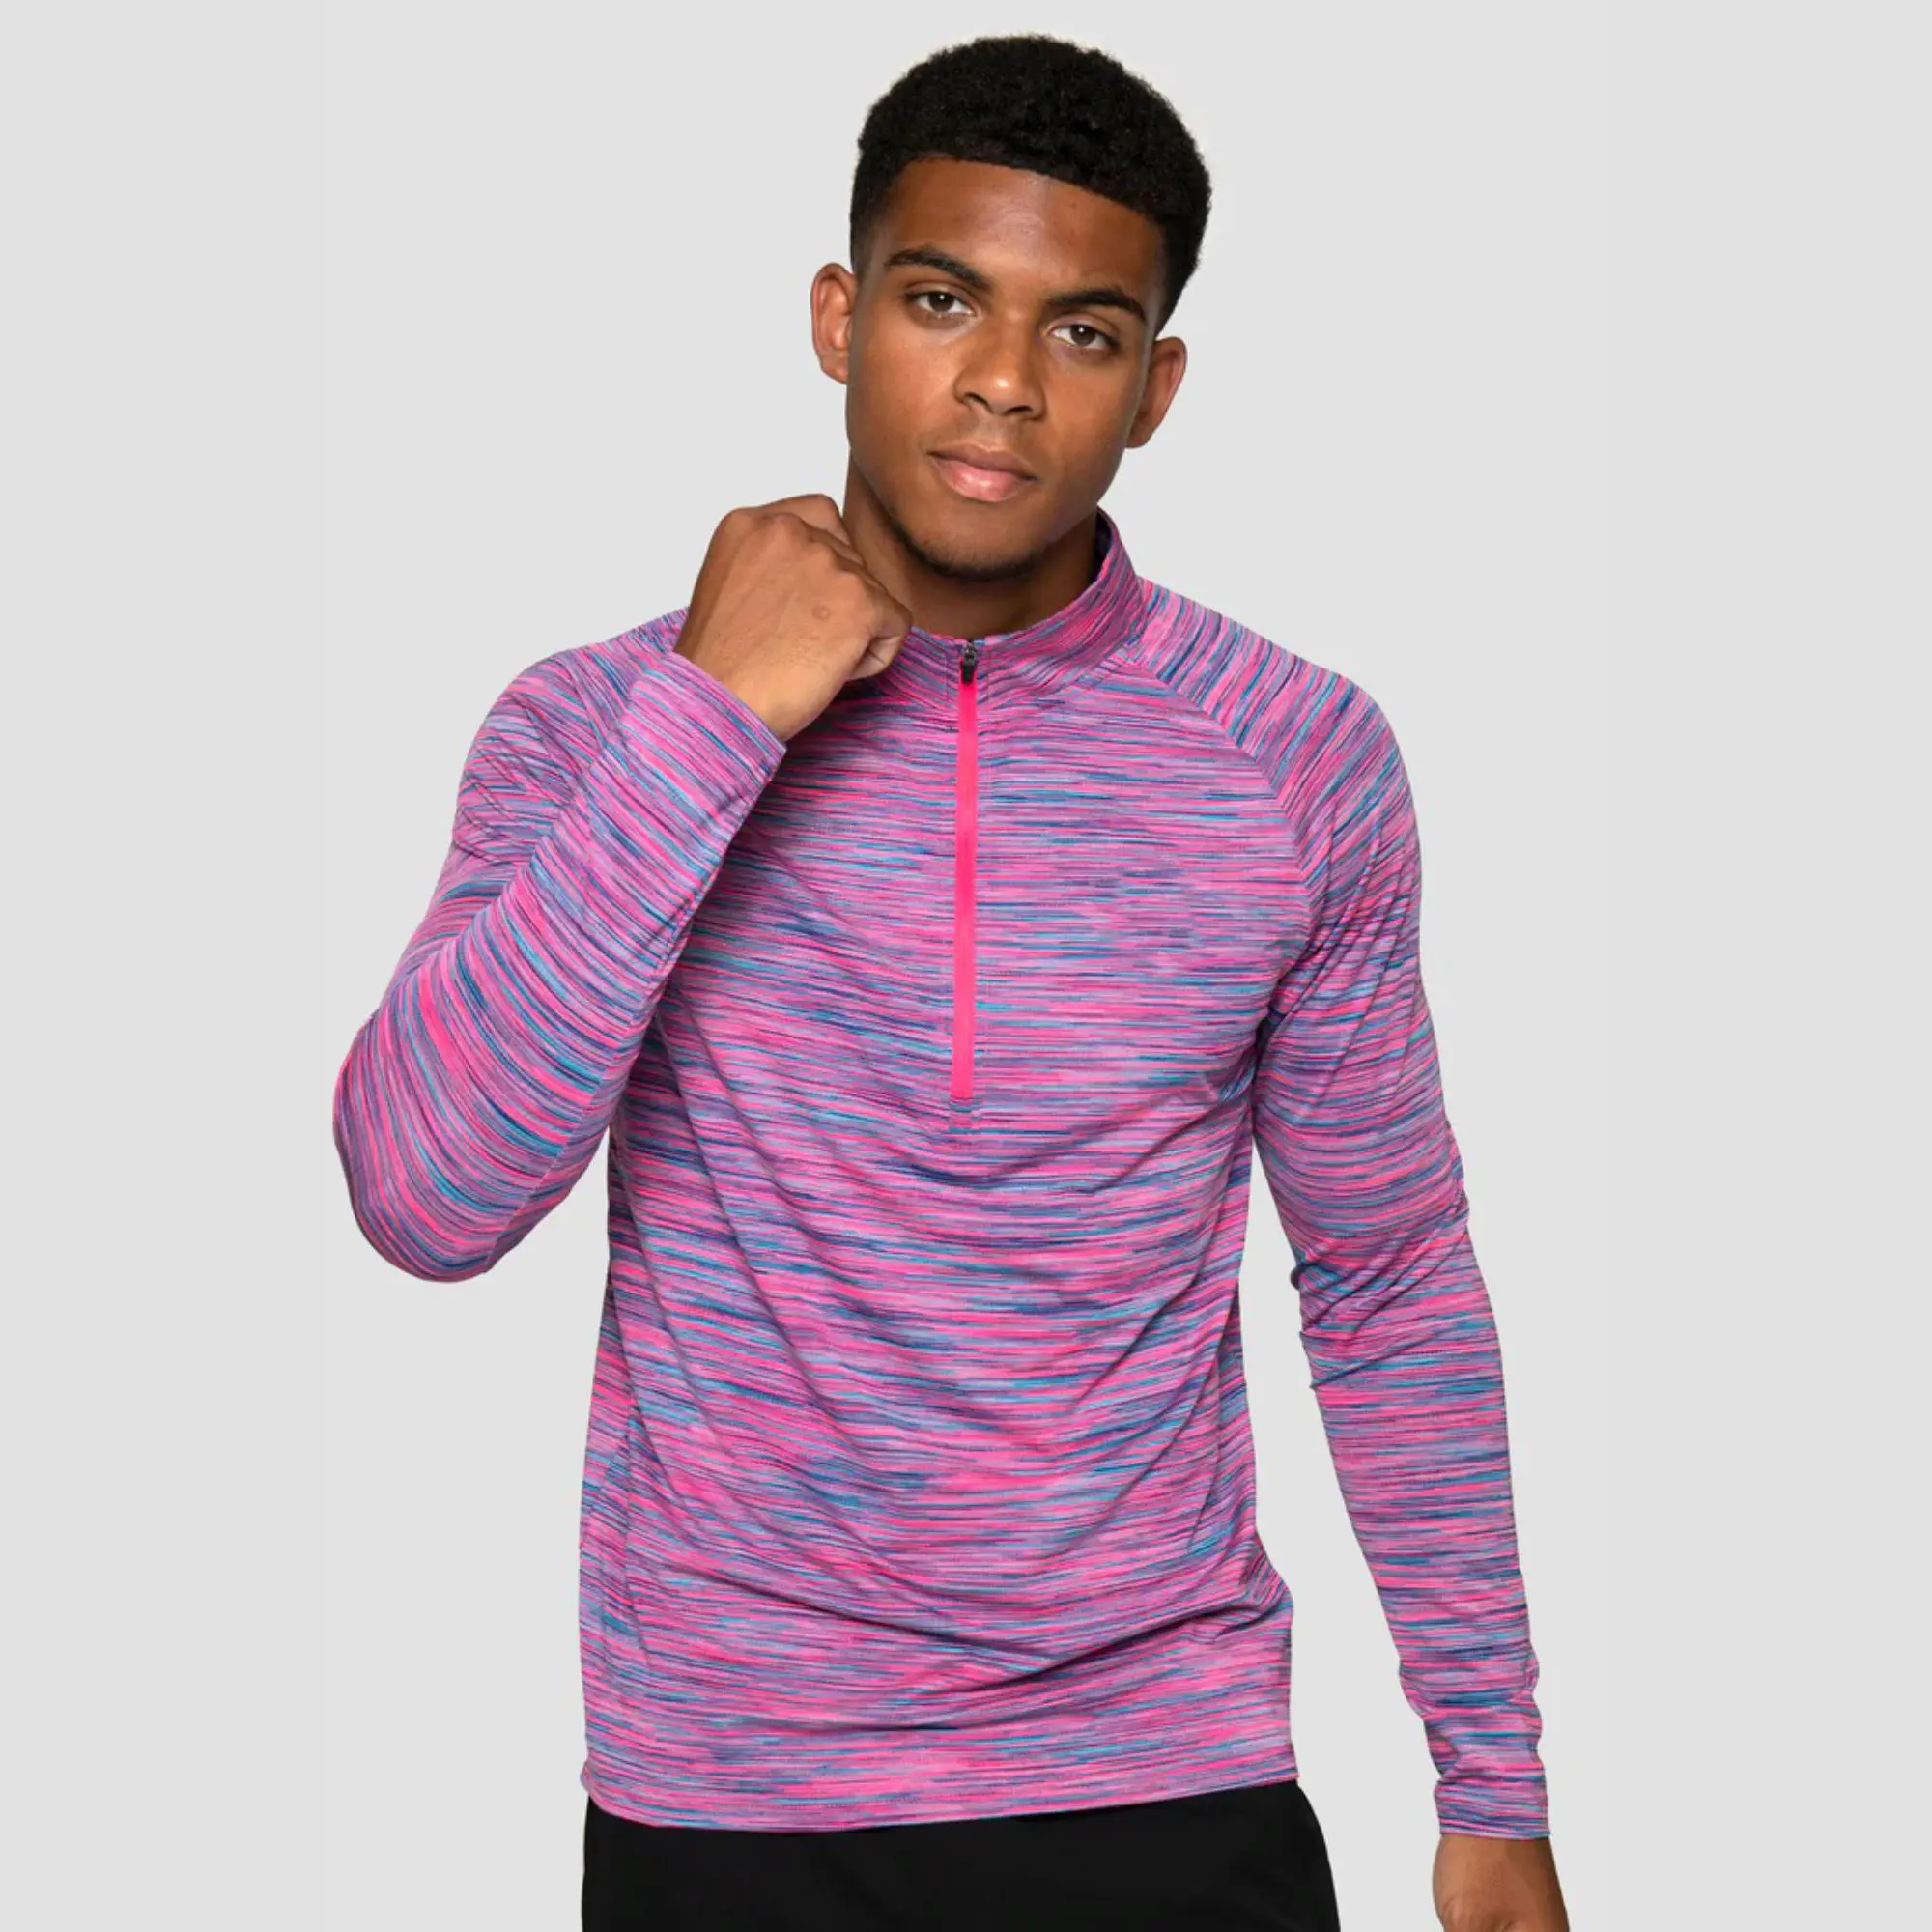 Reflective Logo Lightweight Breathable Pink Navy 88% Polyester 12% Elastane Slim Fit Mens Trail 1/4 Zip Long Sleeves Shirt